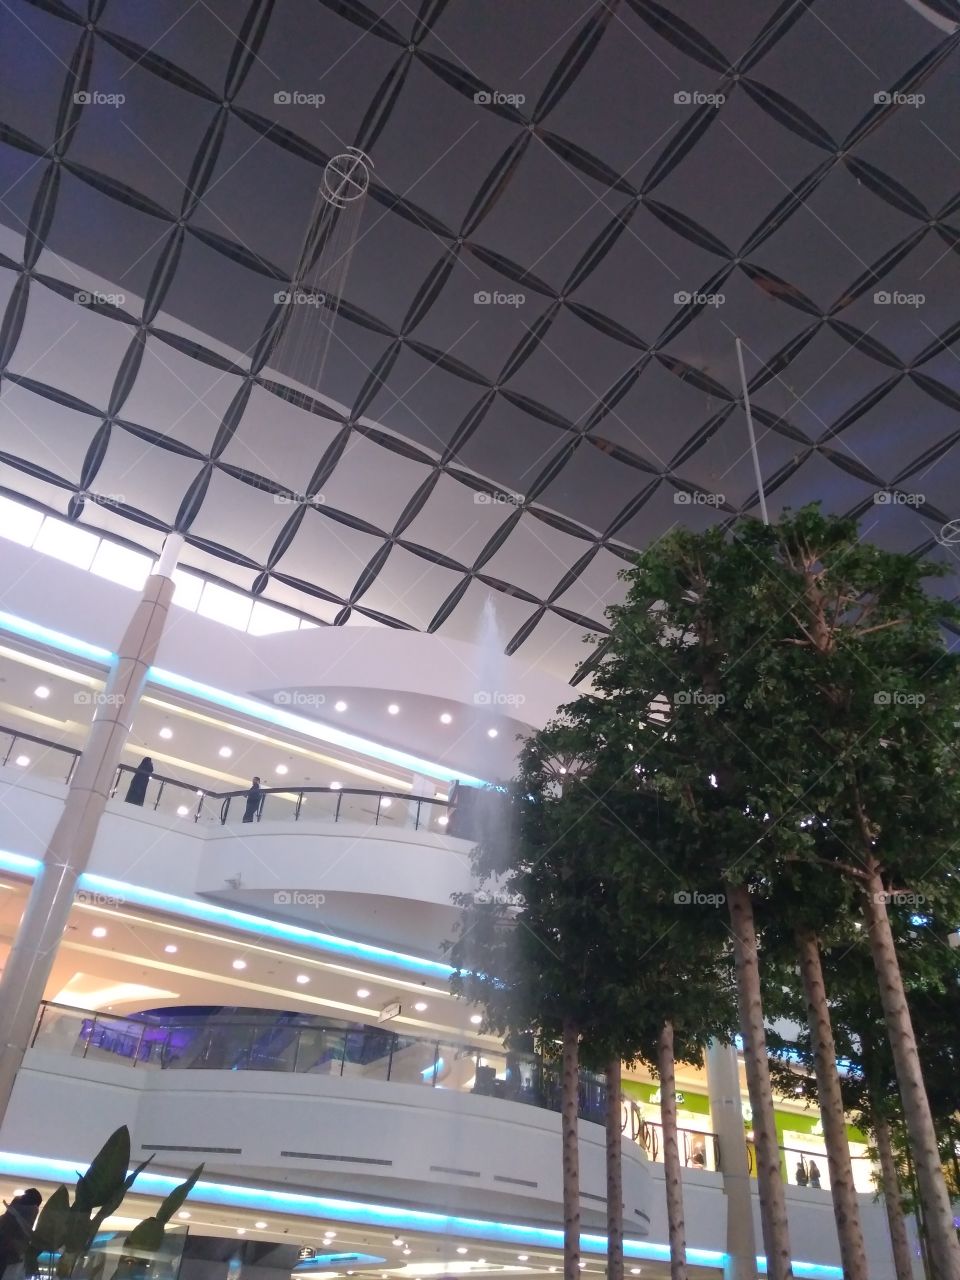 I took this pic in one of the mall in Riyadh, Saudi Arabia.... i love the architecture... it's simple yet elegant